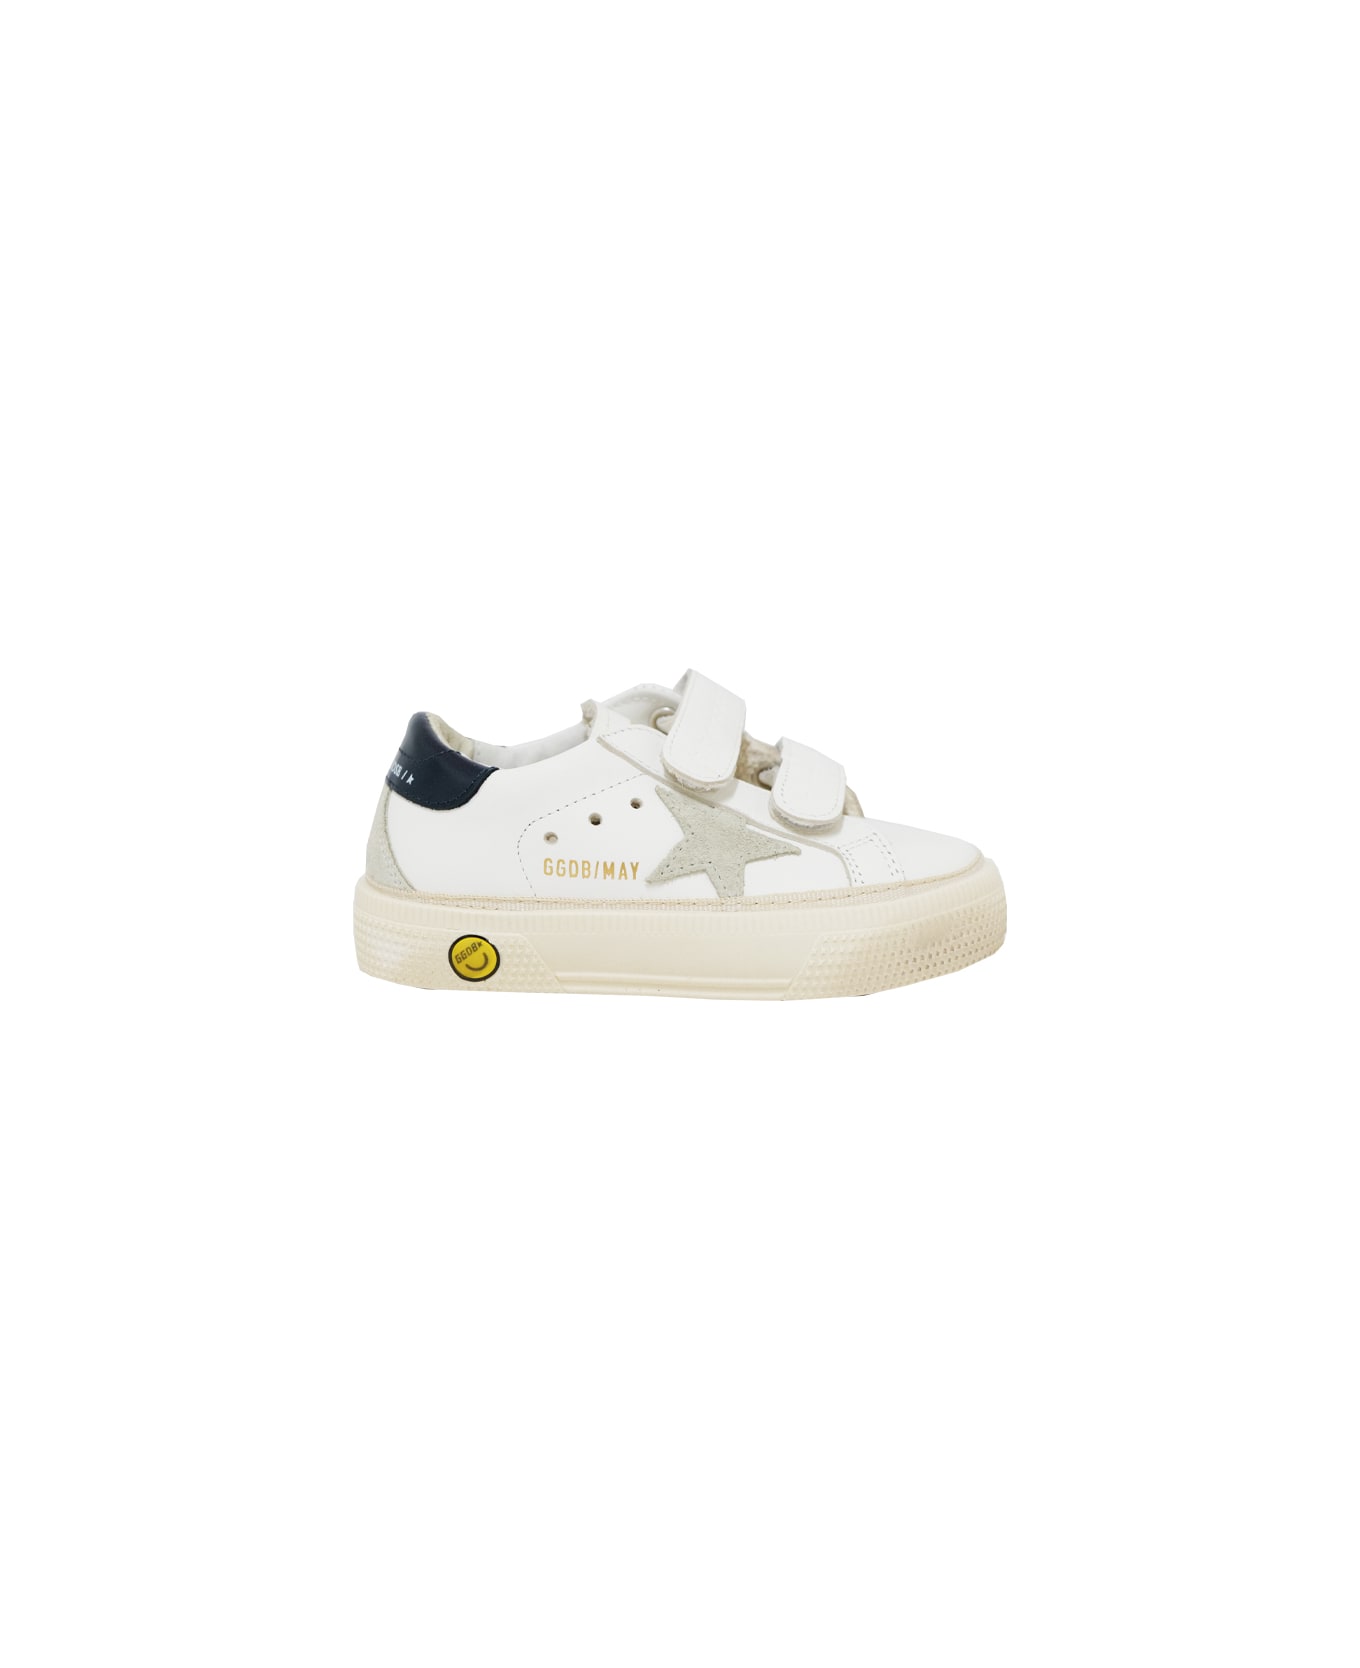 Golden Goose Leather Sneakers - White